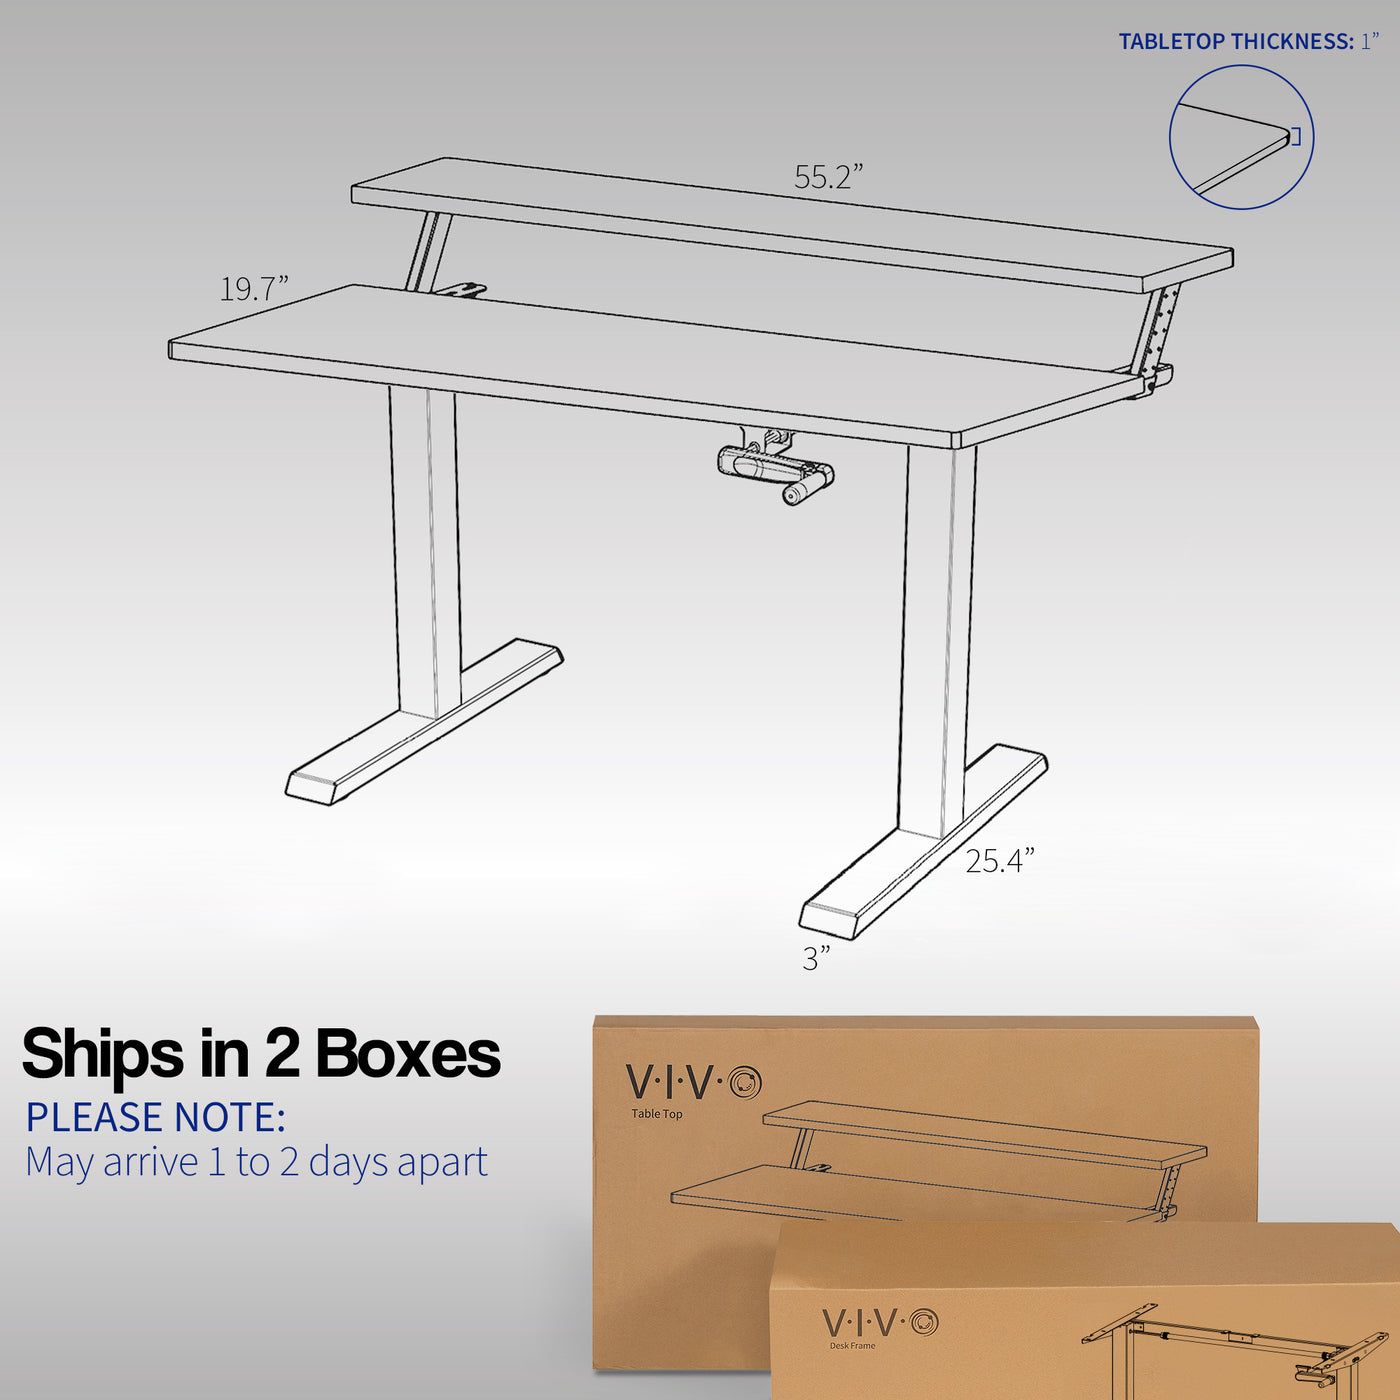 Please note this desk ships in two individual boxes that may arrive at separate times.